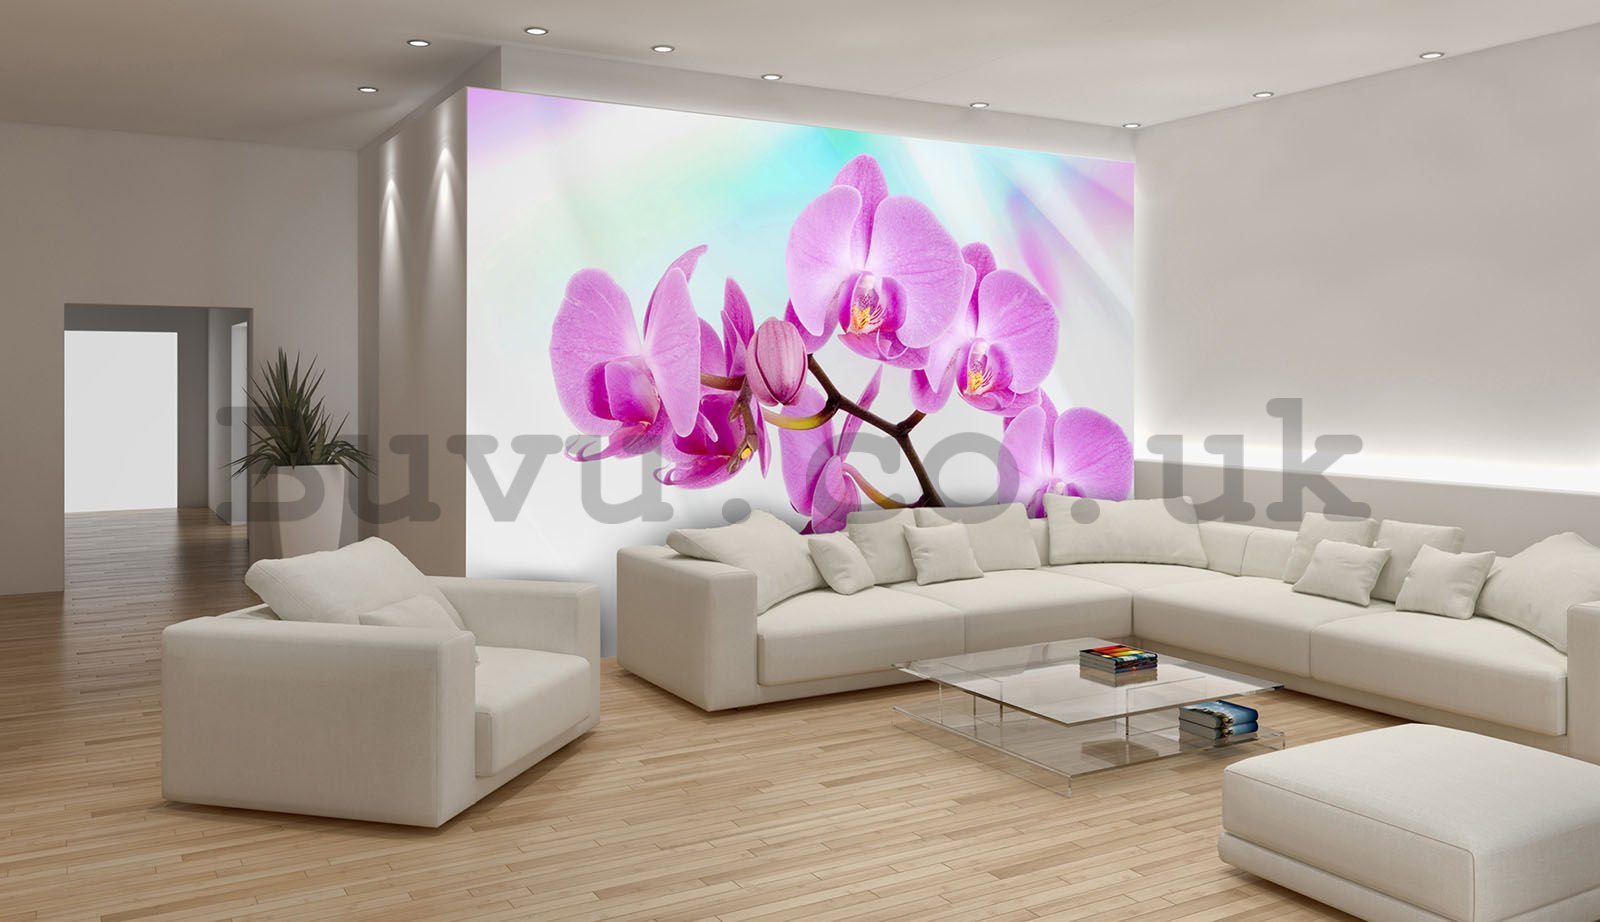 Wall mural vlies: Violet orchid - 416x254 cm